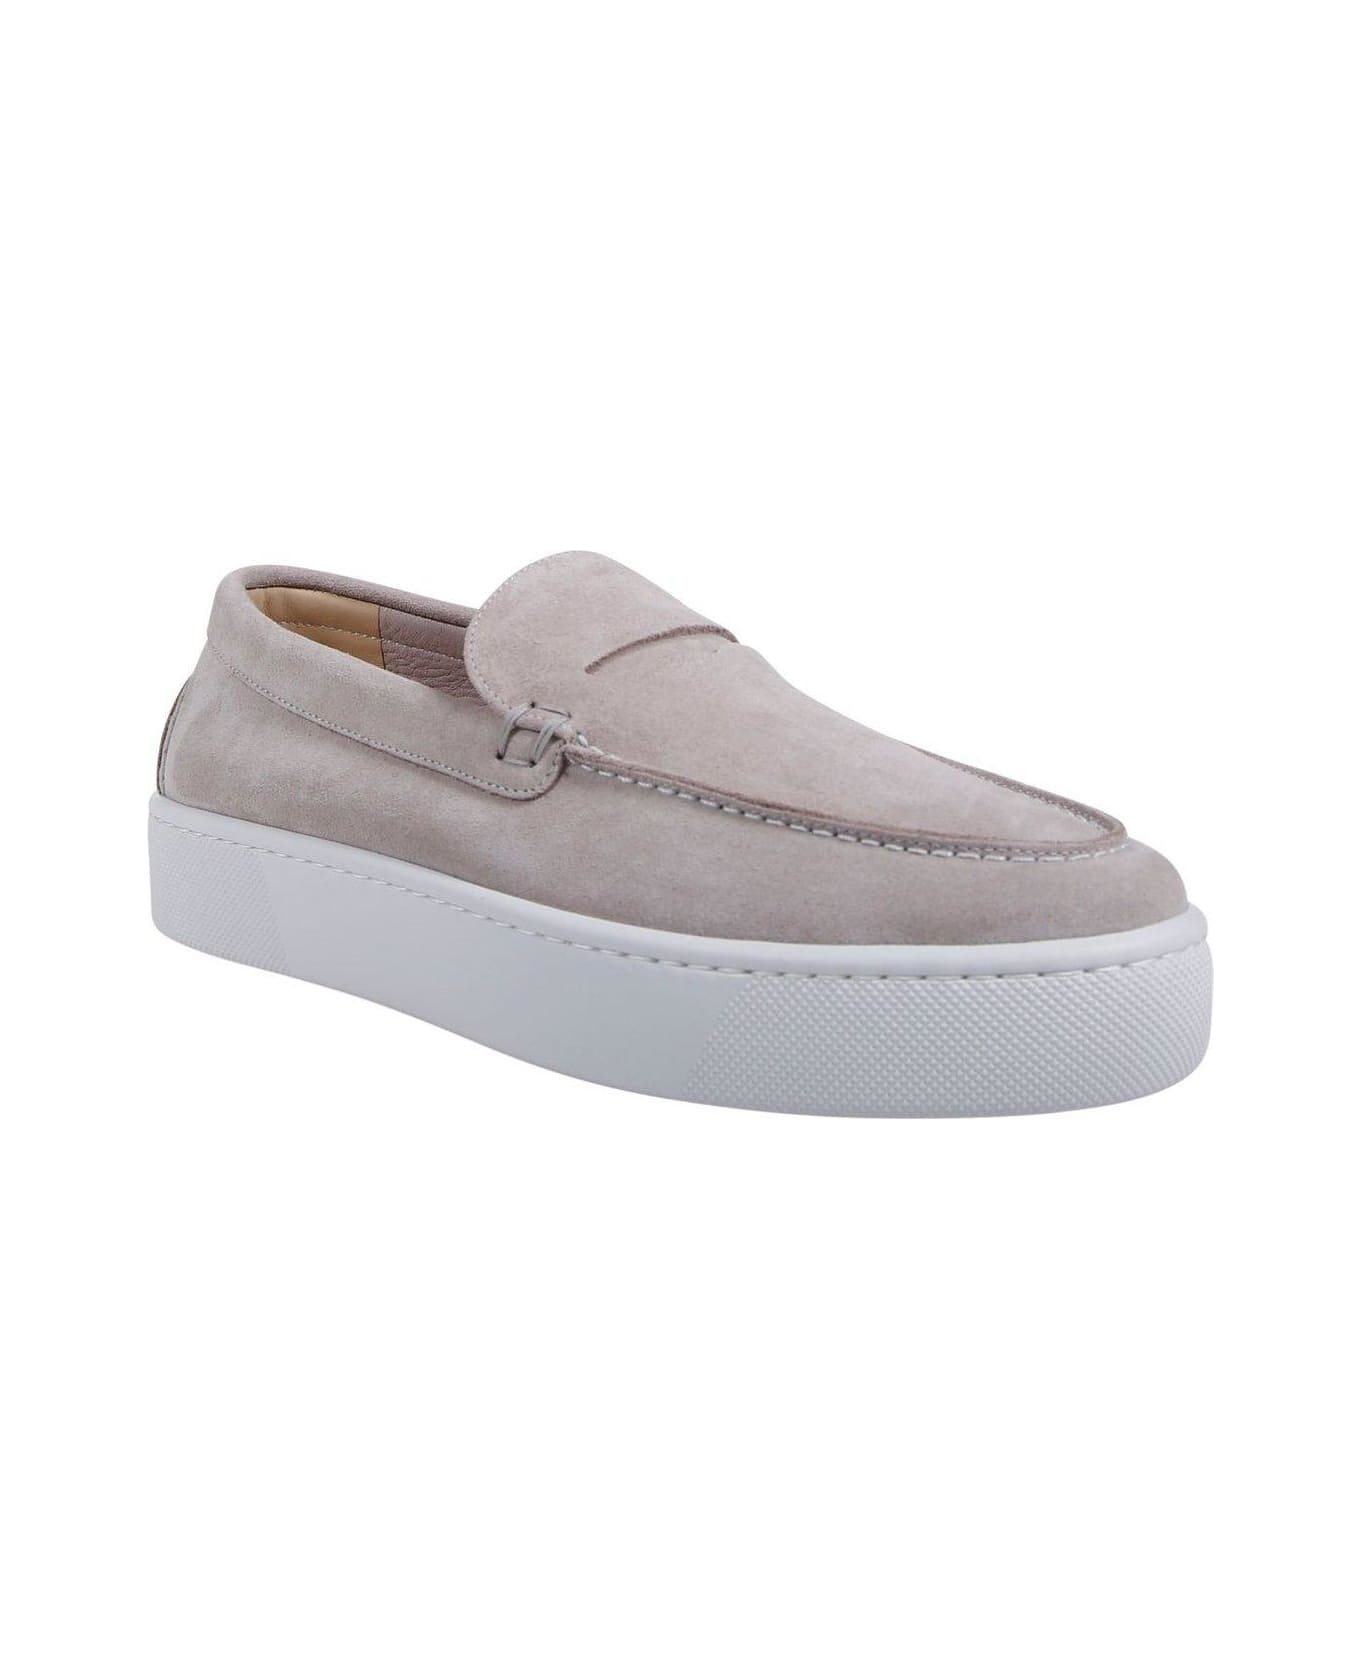 Christian Louboutin Chunky Slip-on Loafers - GOOSE